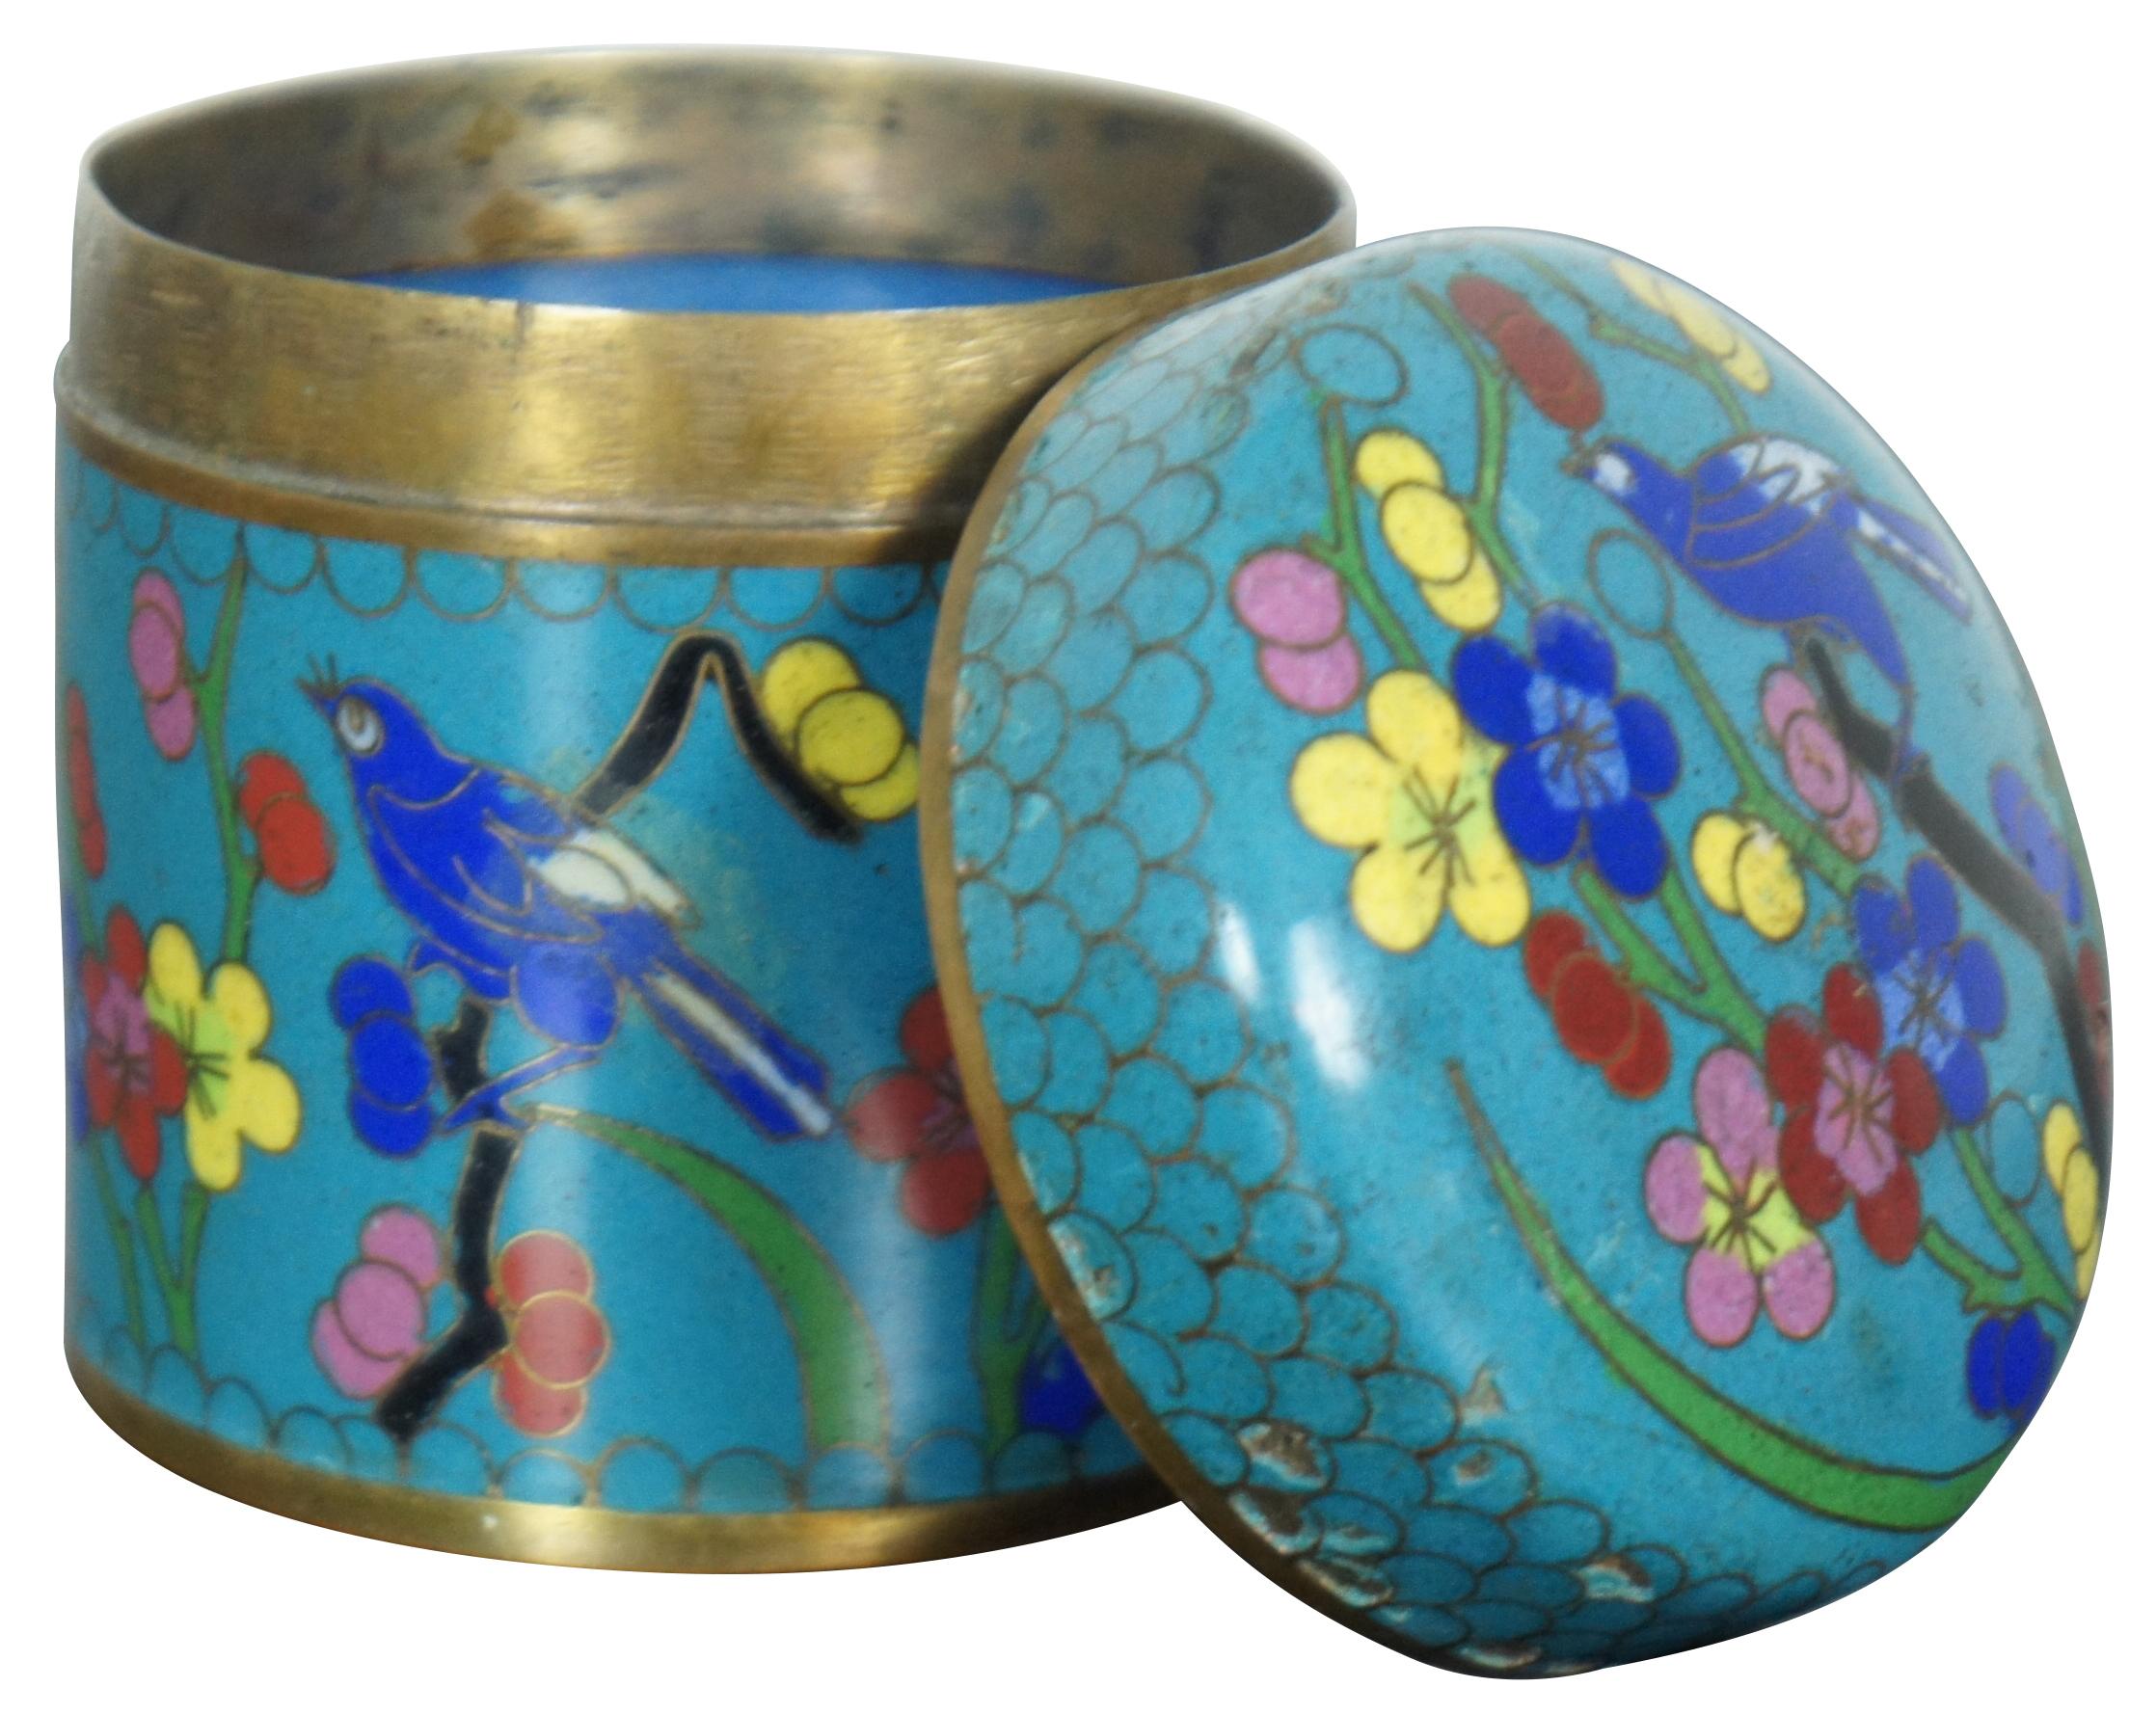 Chinoiserie Chinese Cloisonne Enamel Blue Floral Tea Caddy Canister Trinket Jar Stamp Box